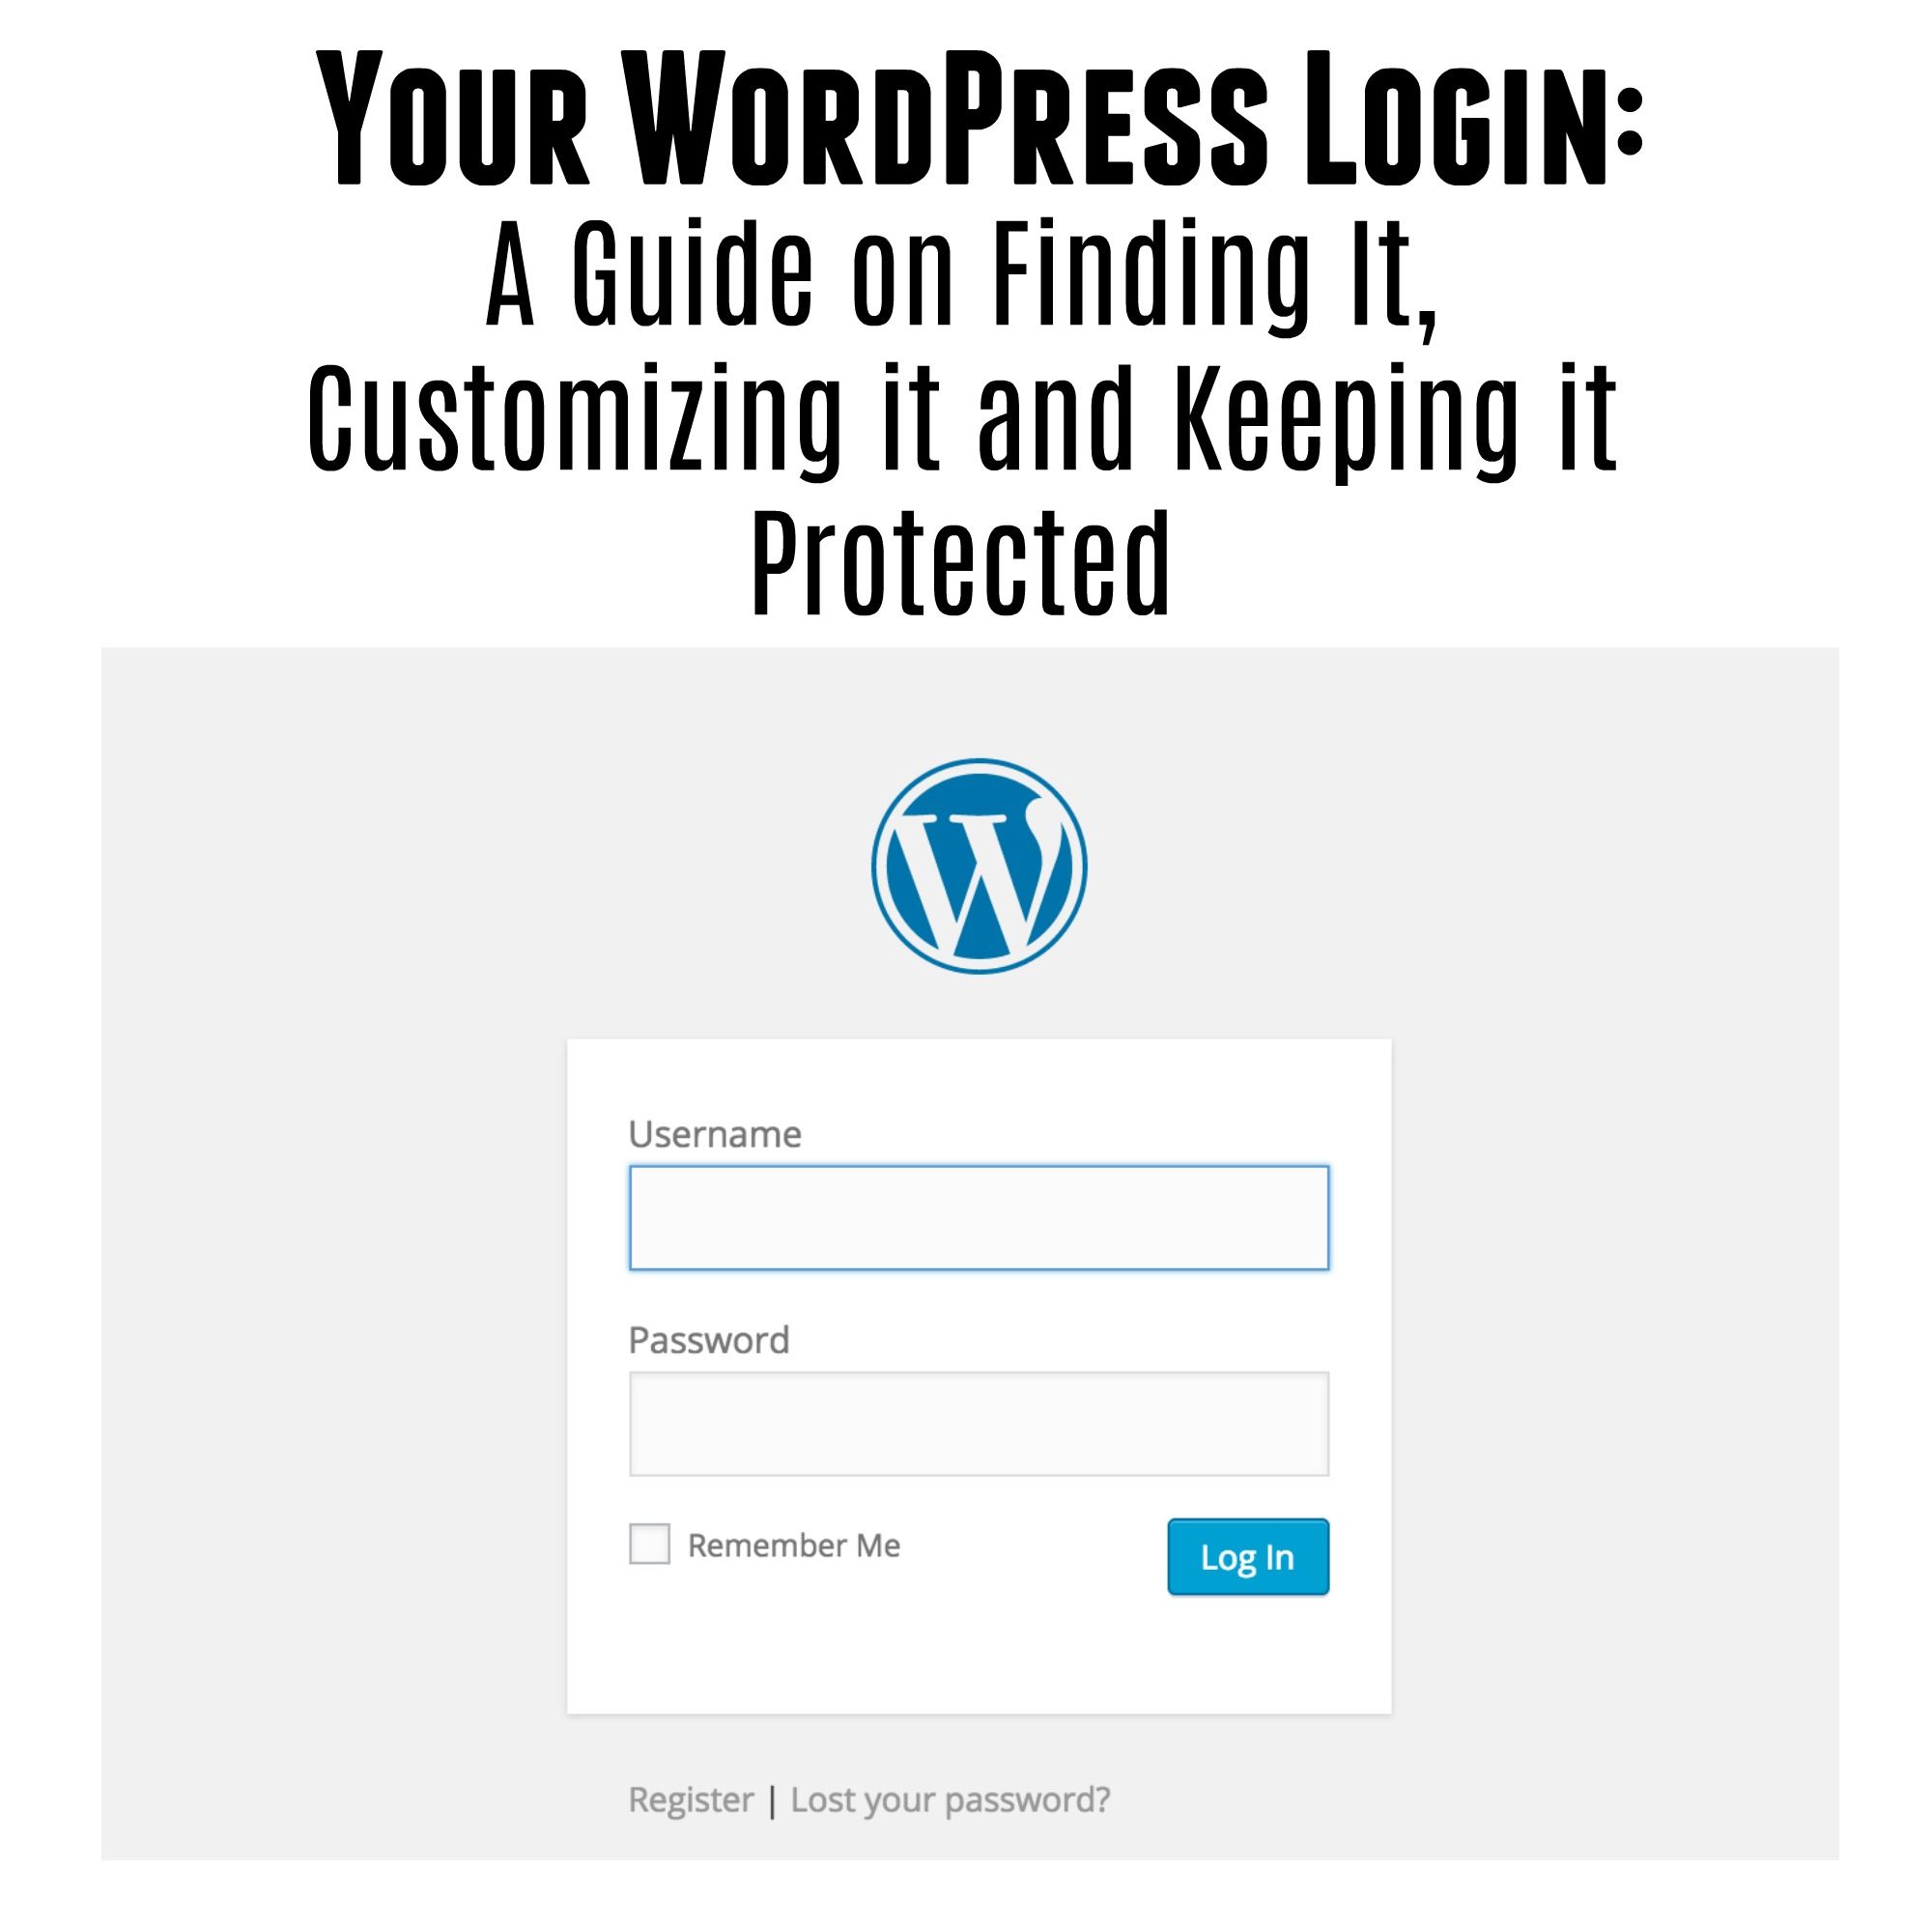 Your WordPress Login - A Guide on Finding It, Customizing it and Keeping it Protected